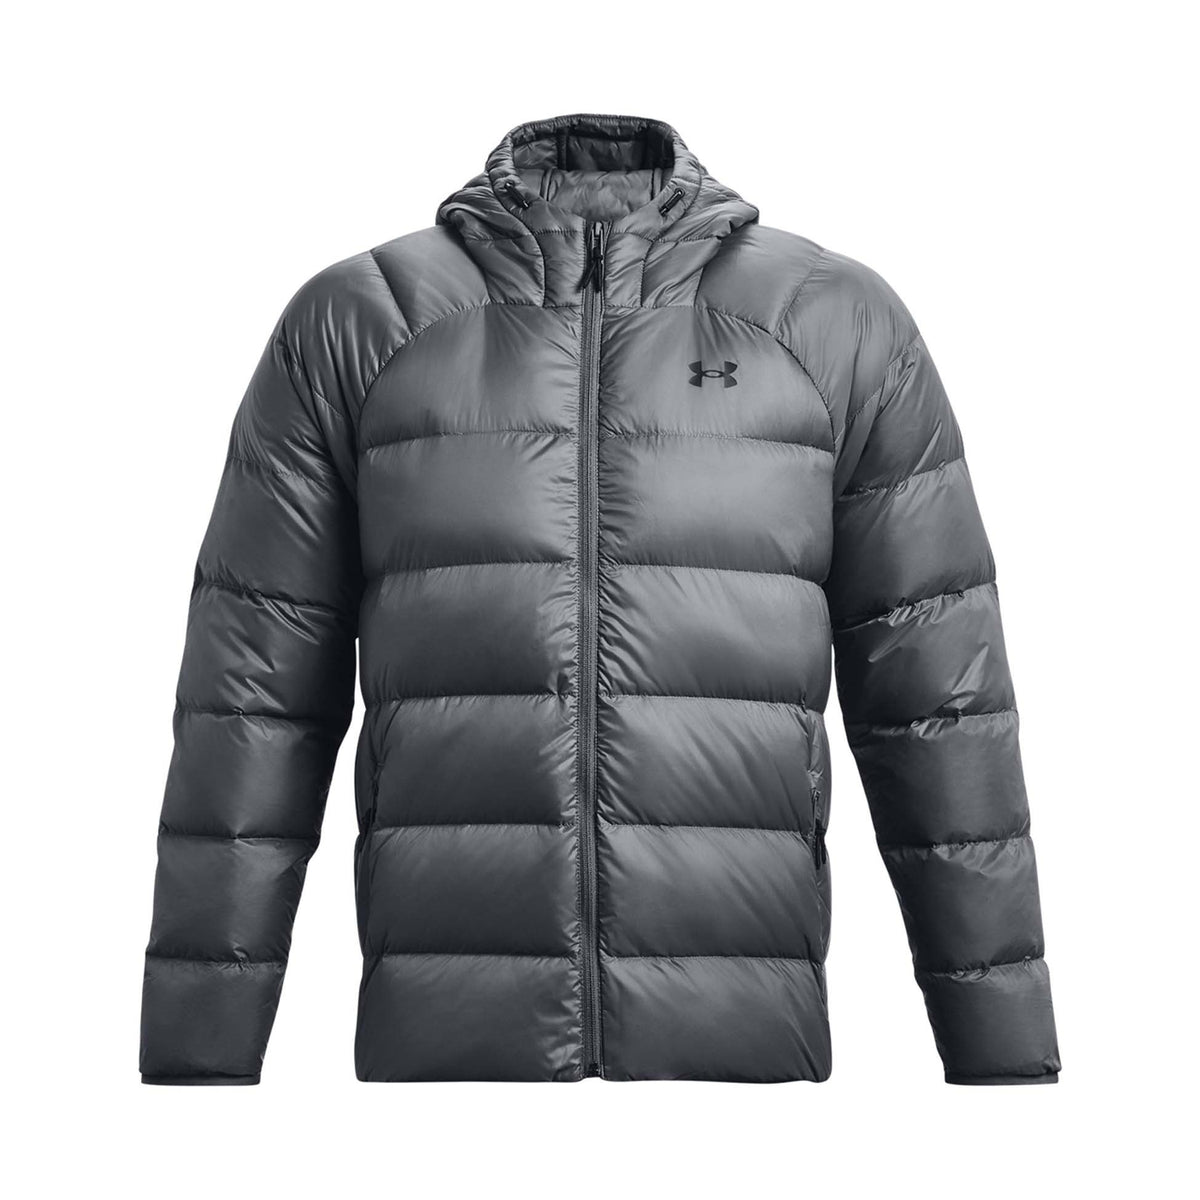 Under Armour Storm Armour Down 2.0 Mens Jacket